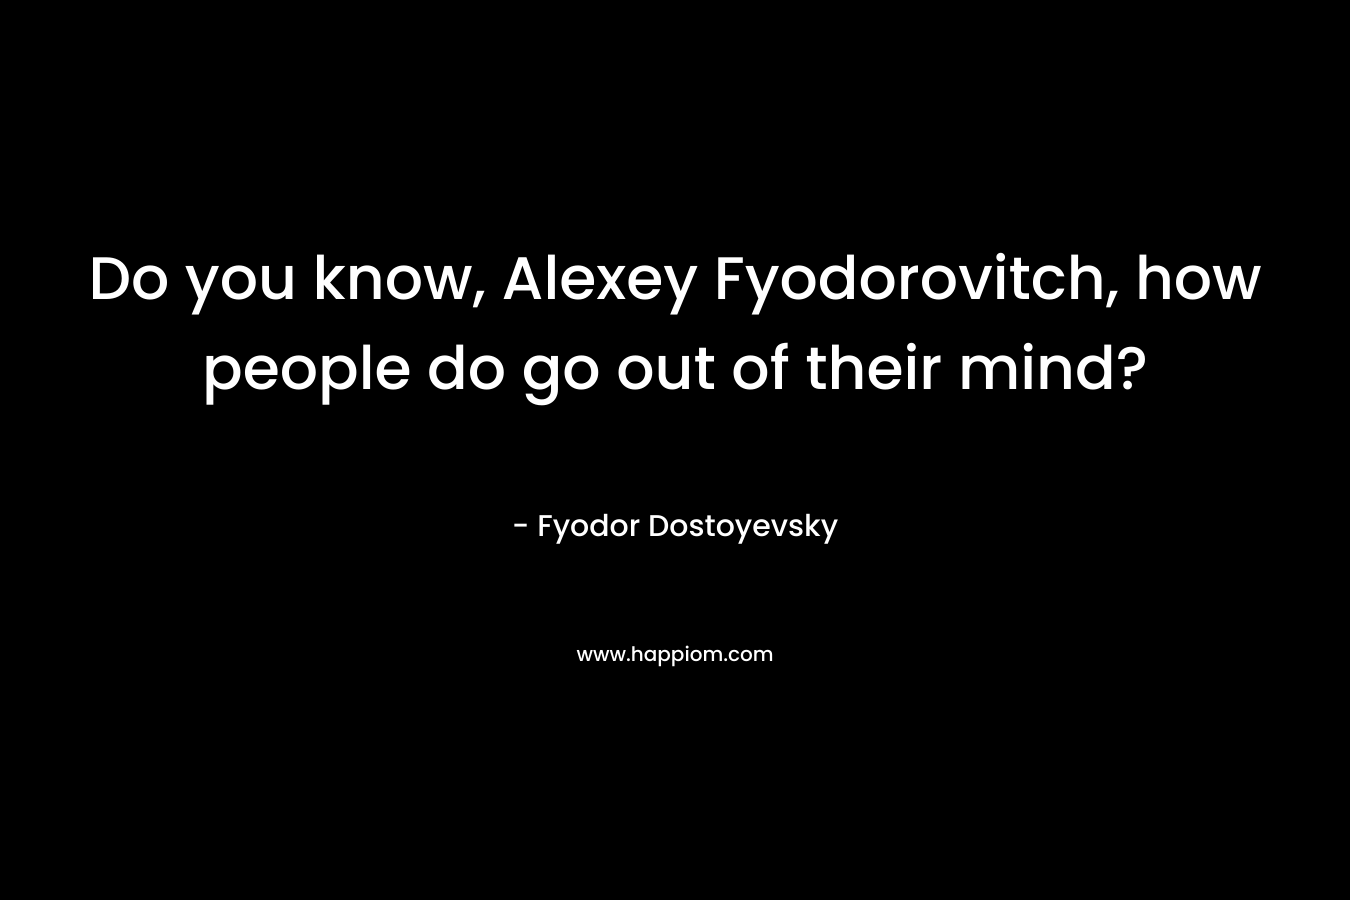 Do you know, Alexey Fyodorovitch, how people do go out of their mind? – Fyodor Dostoyevsky